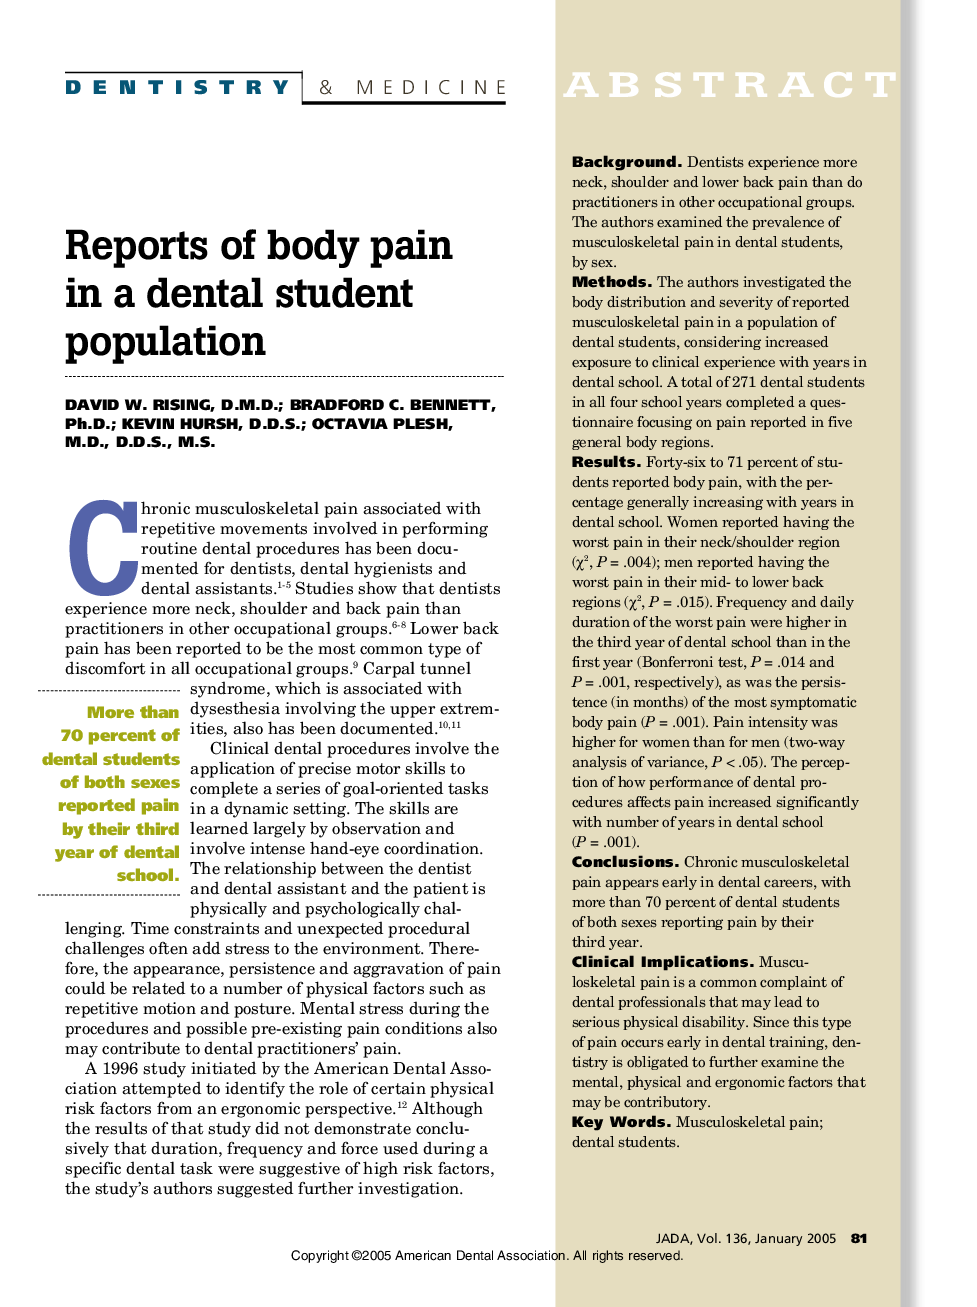 Reports of body pain in a dental student population